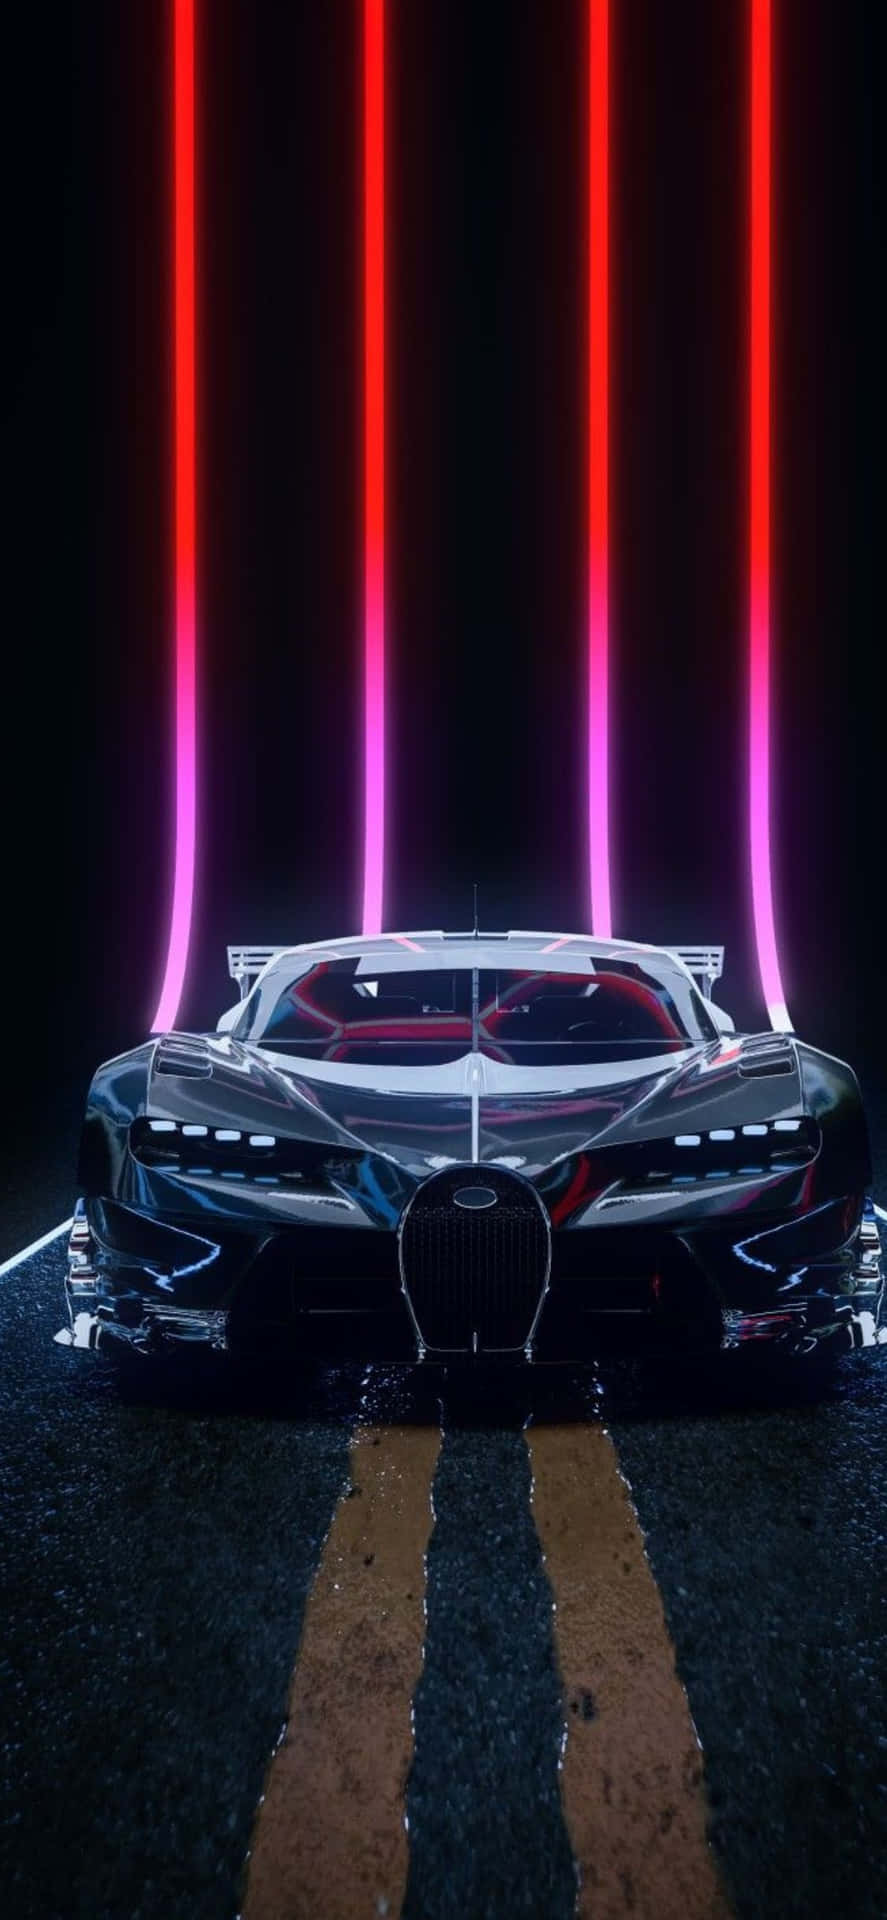 Image   The Bold and Extreme - Iphone Xs in a Bugatti